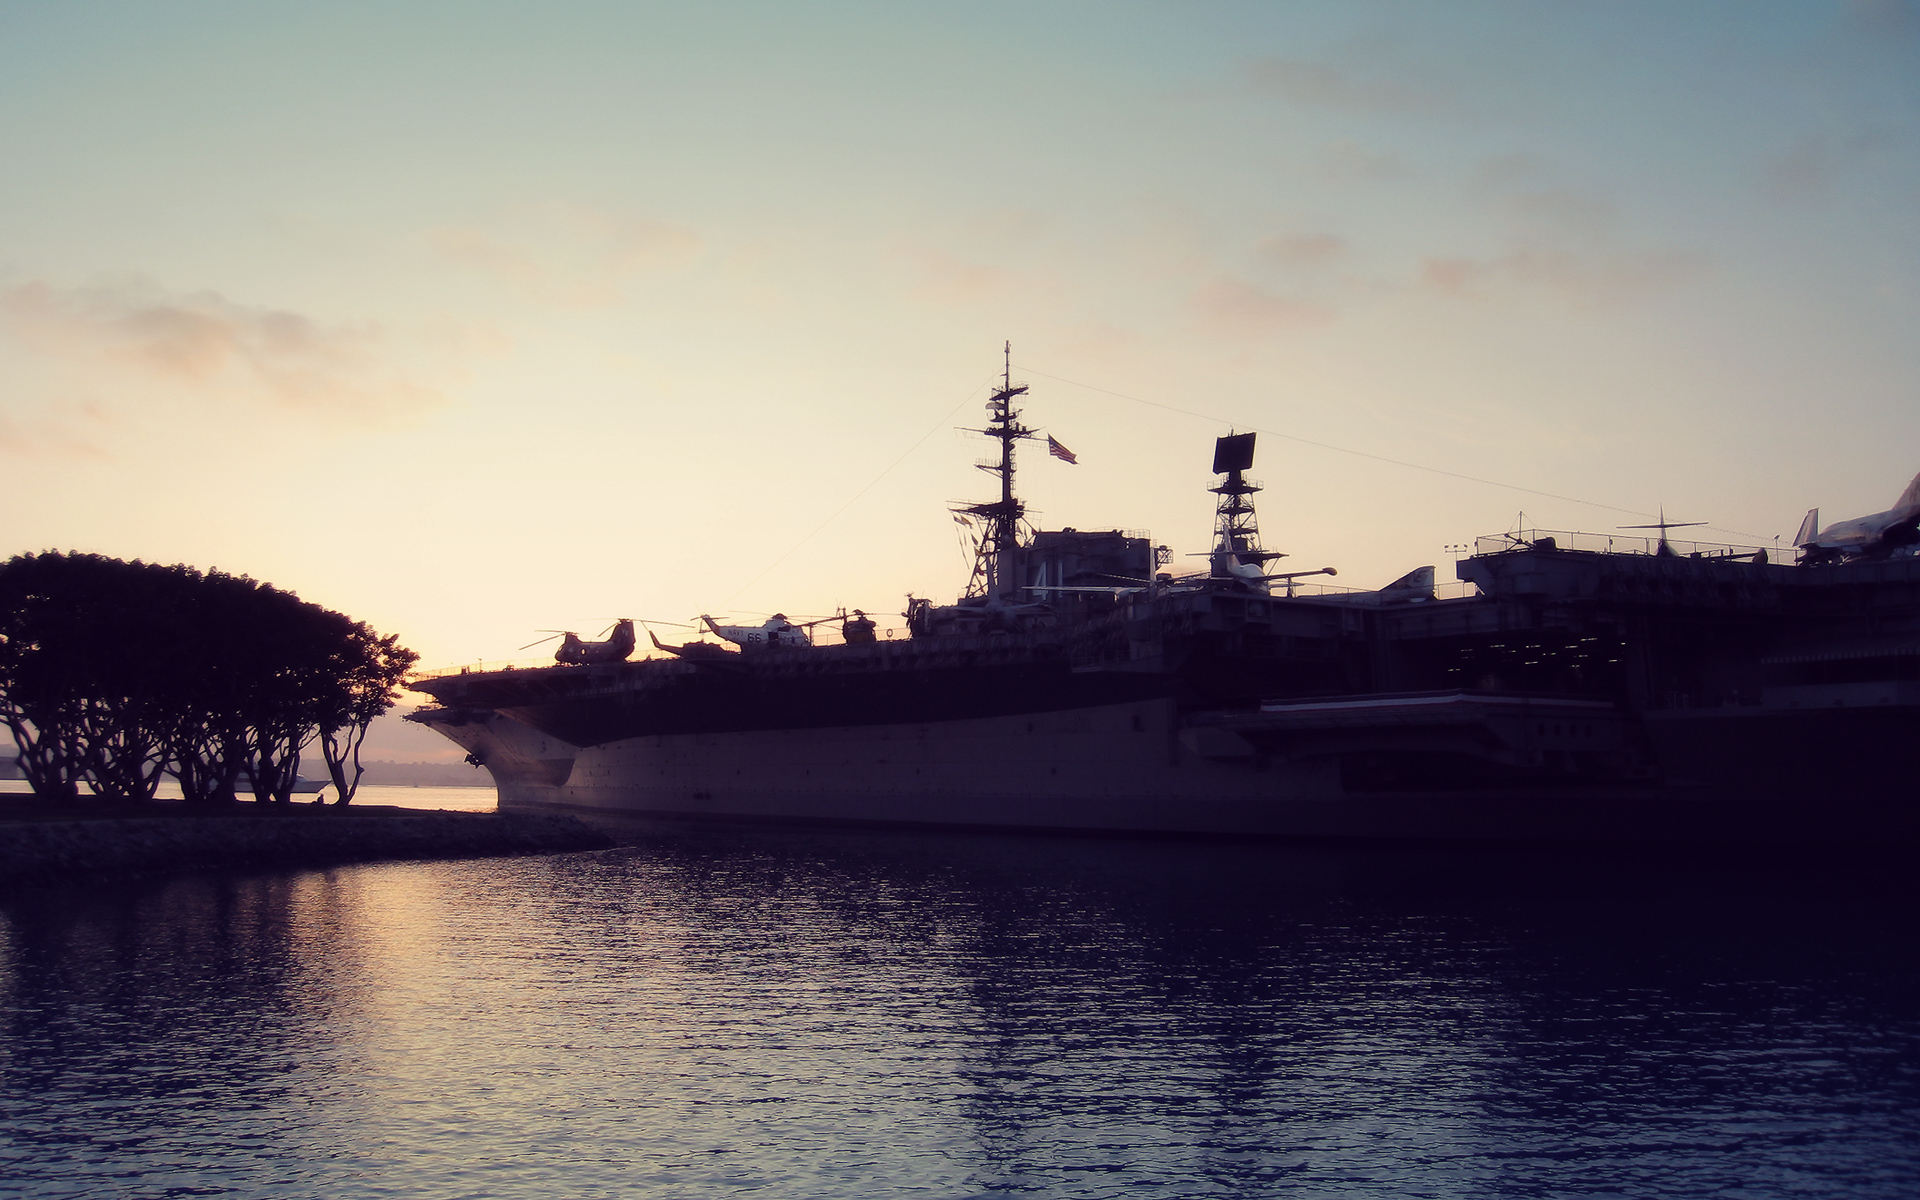 sunrise, Landscapes, San, Diego, Vehicles, Aircraft, Carriers Wallpaper